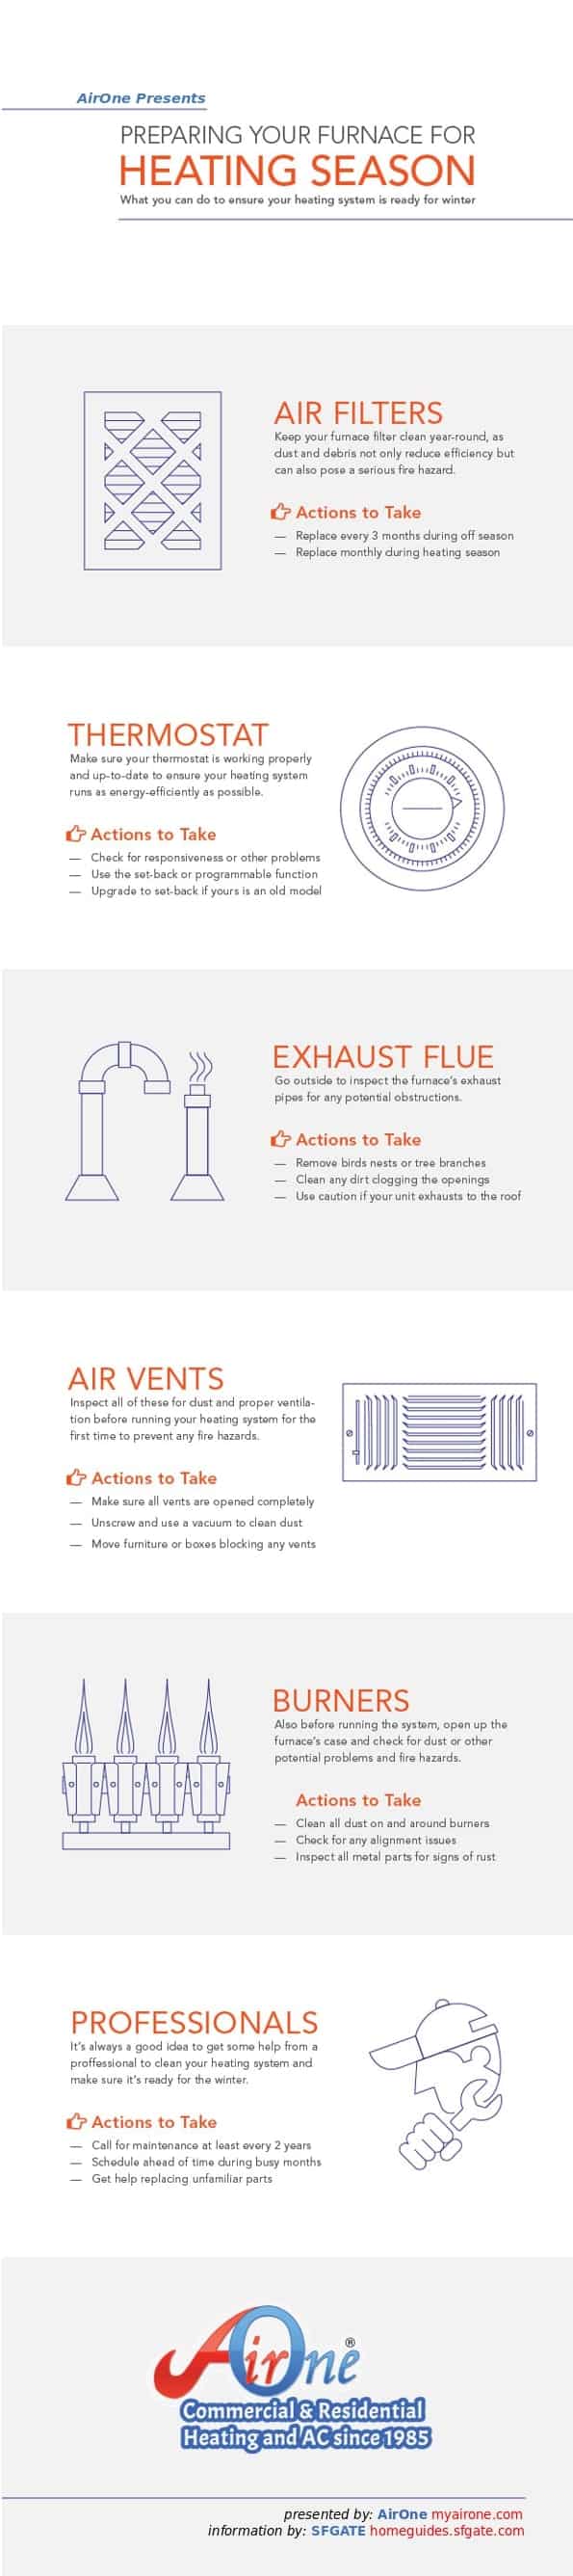 ways to prepare your furnace for heating season